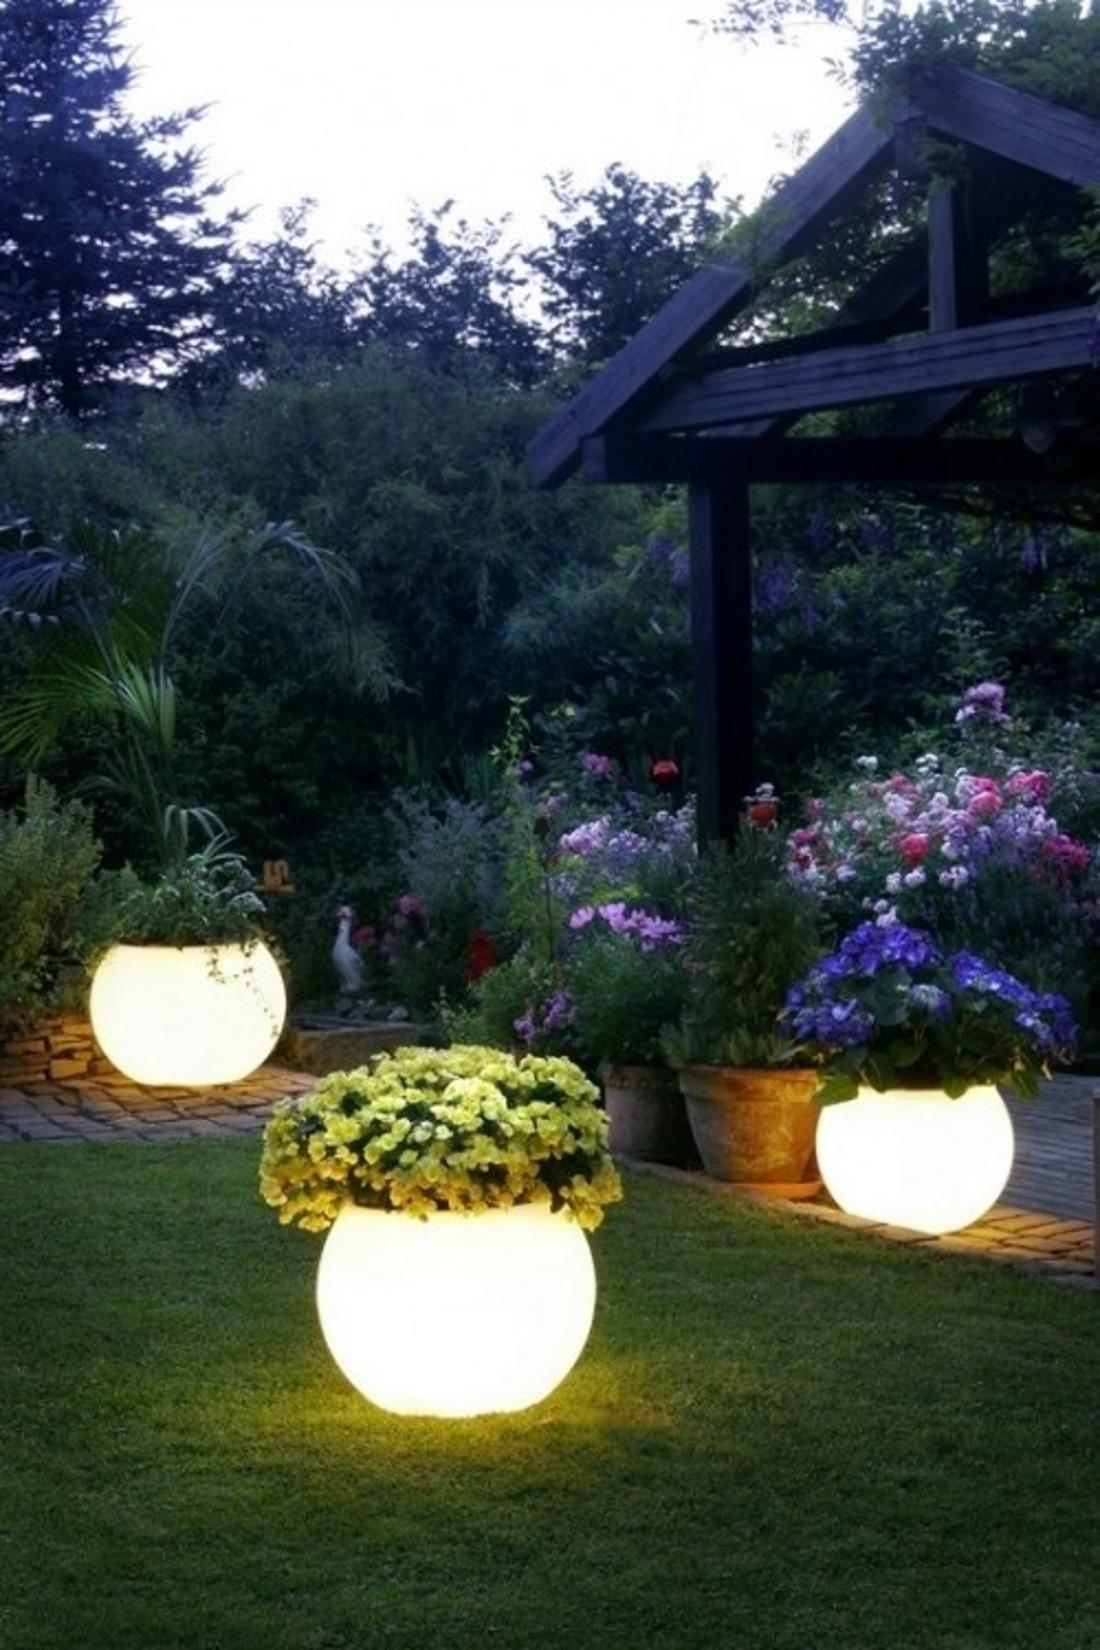 Coat planters with glow-in-the-dark paint for instant night lighting.